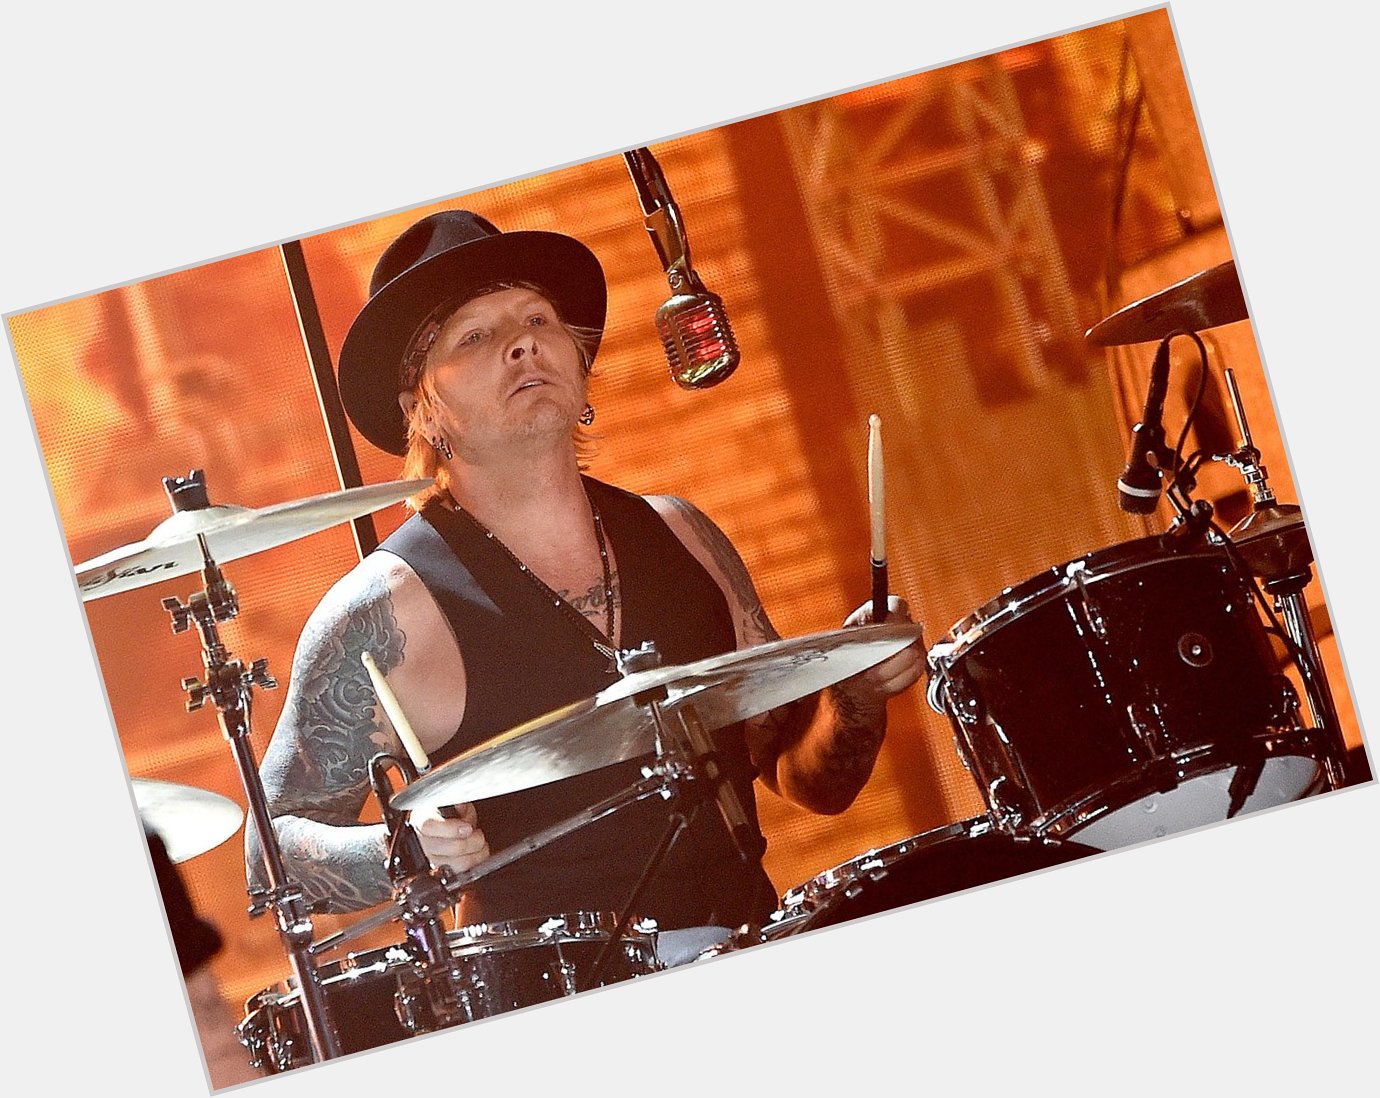 Please join us here at in wishing the one and only Matt Sorum a very Happy 60th Birthday today  